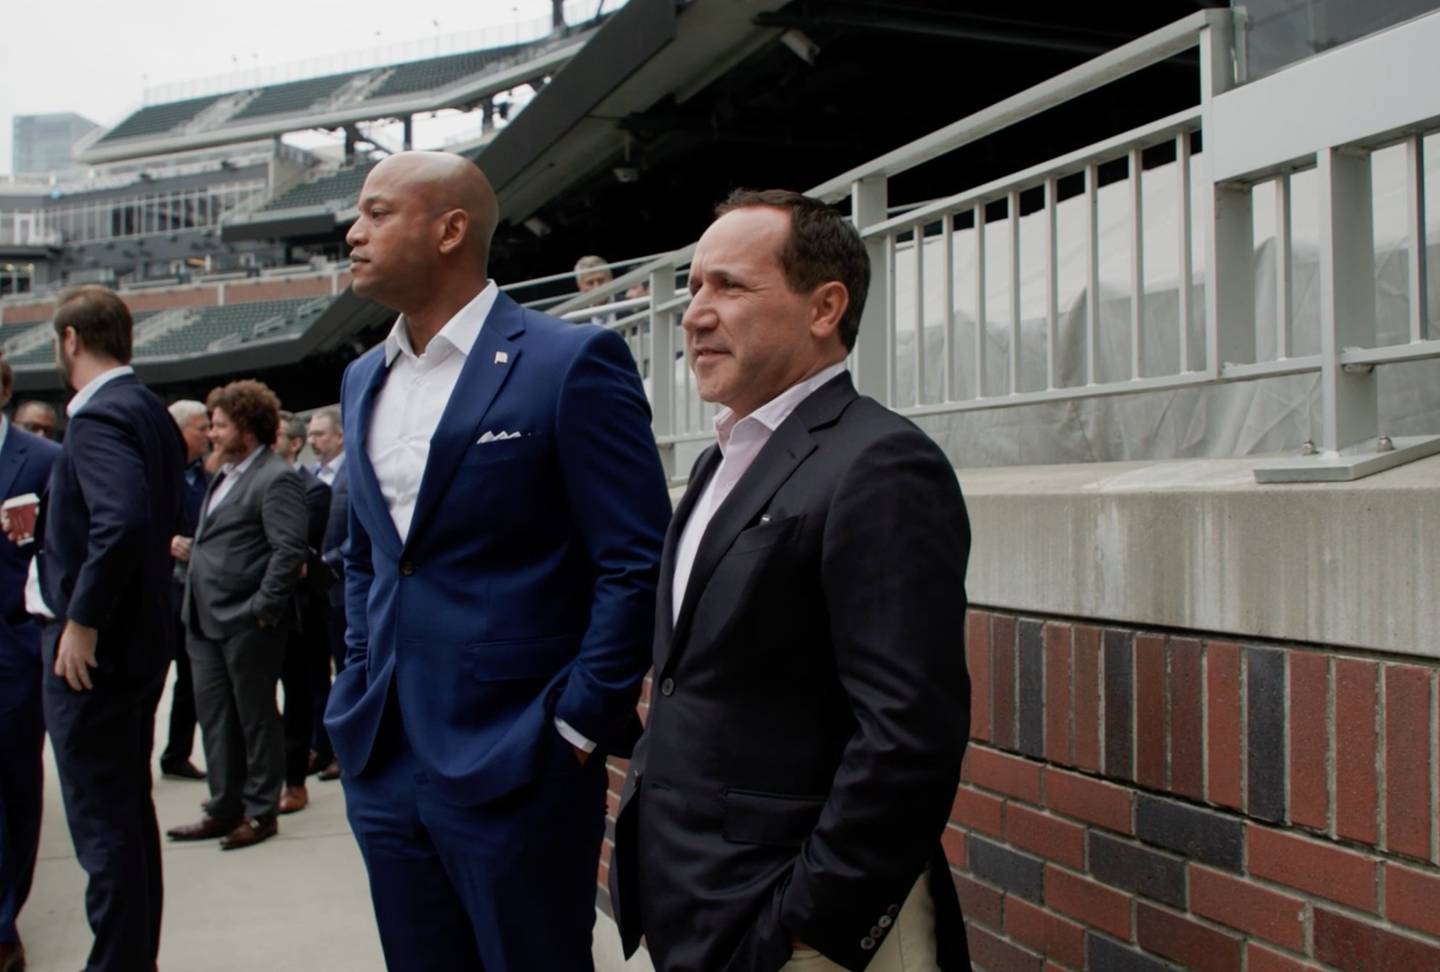 A screengrab from an Orioles video shows Gov. Wes Moore, left, standing next to Orioles CEO John Angelos at Truist Park in Atlanta.